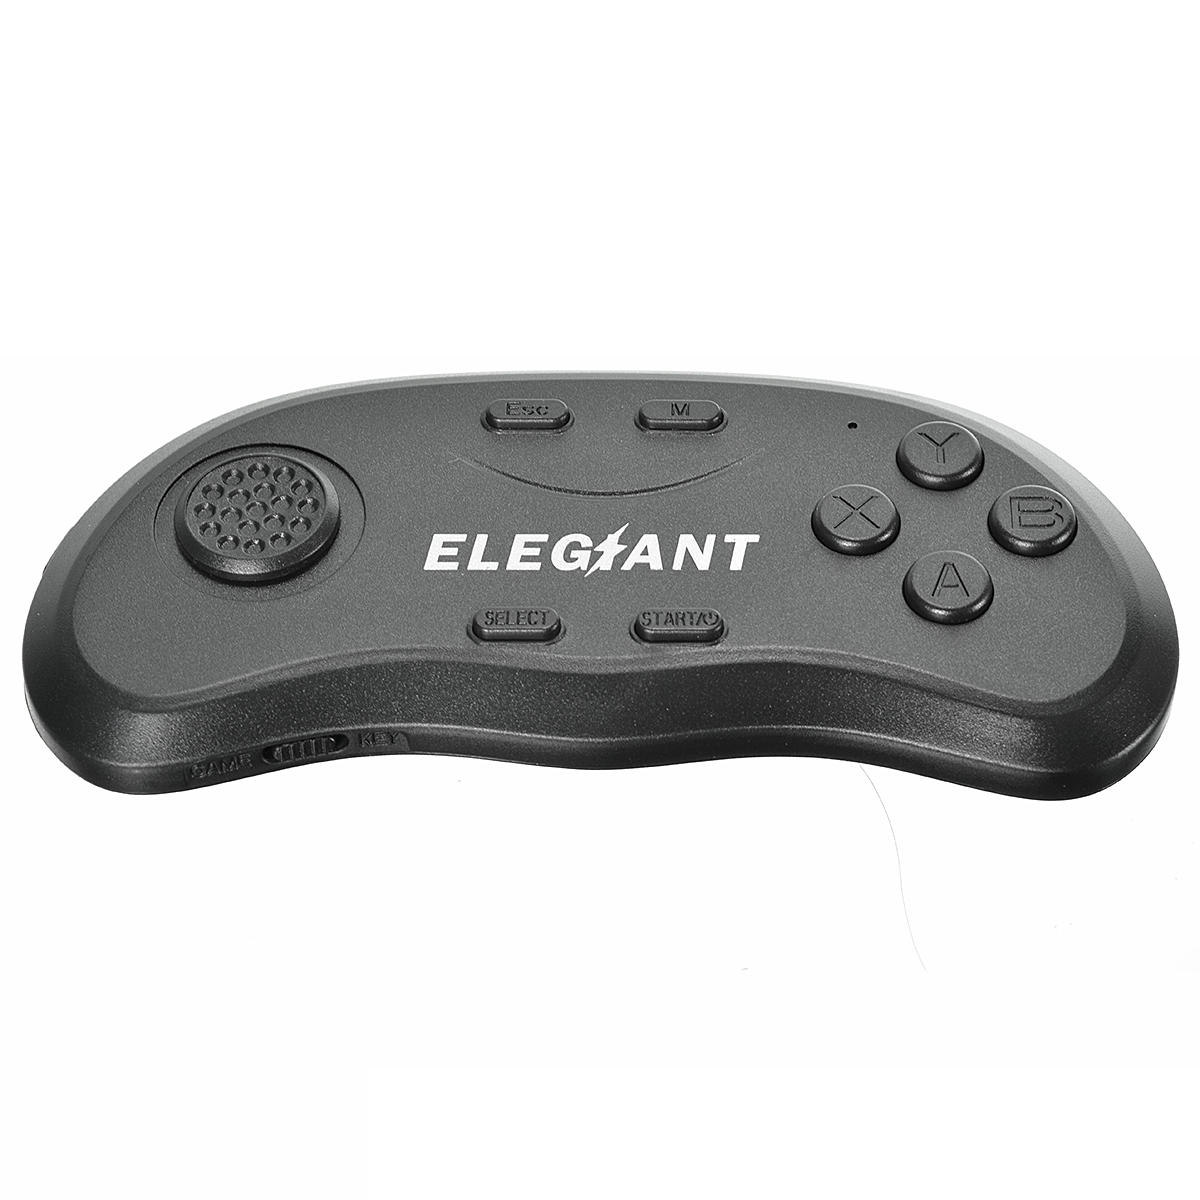 2 Generation bluetooth 3.0 VR Glasses Remote Control Gamepad For Android IOS PC